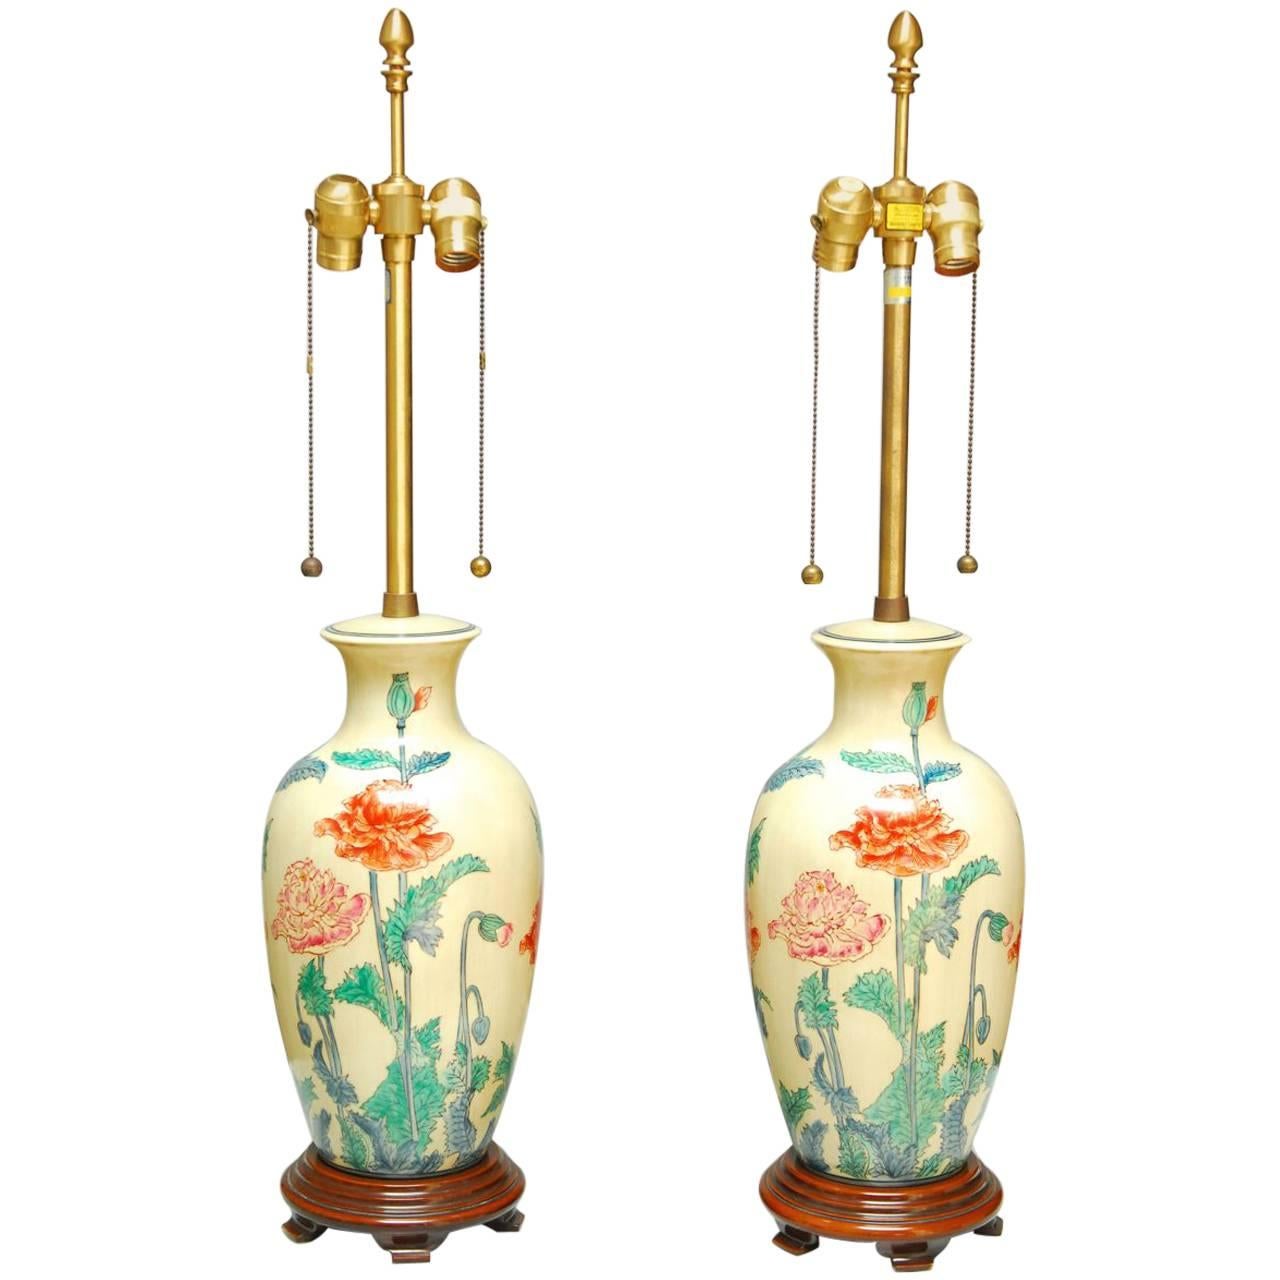 Pair of Marbro Ceramic Floral Vase Table Lamps